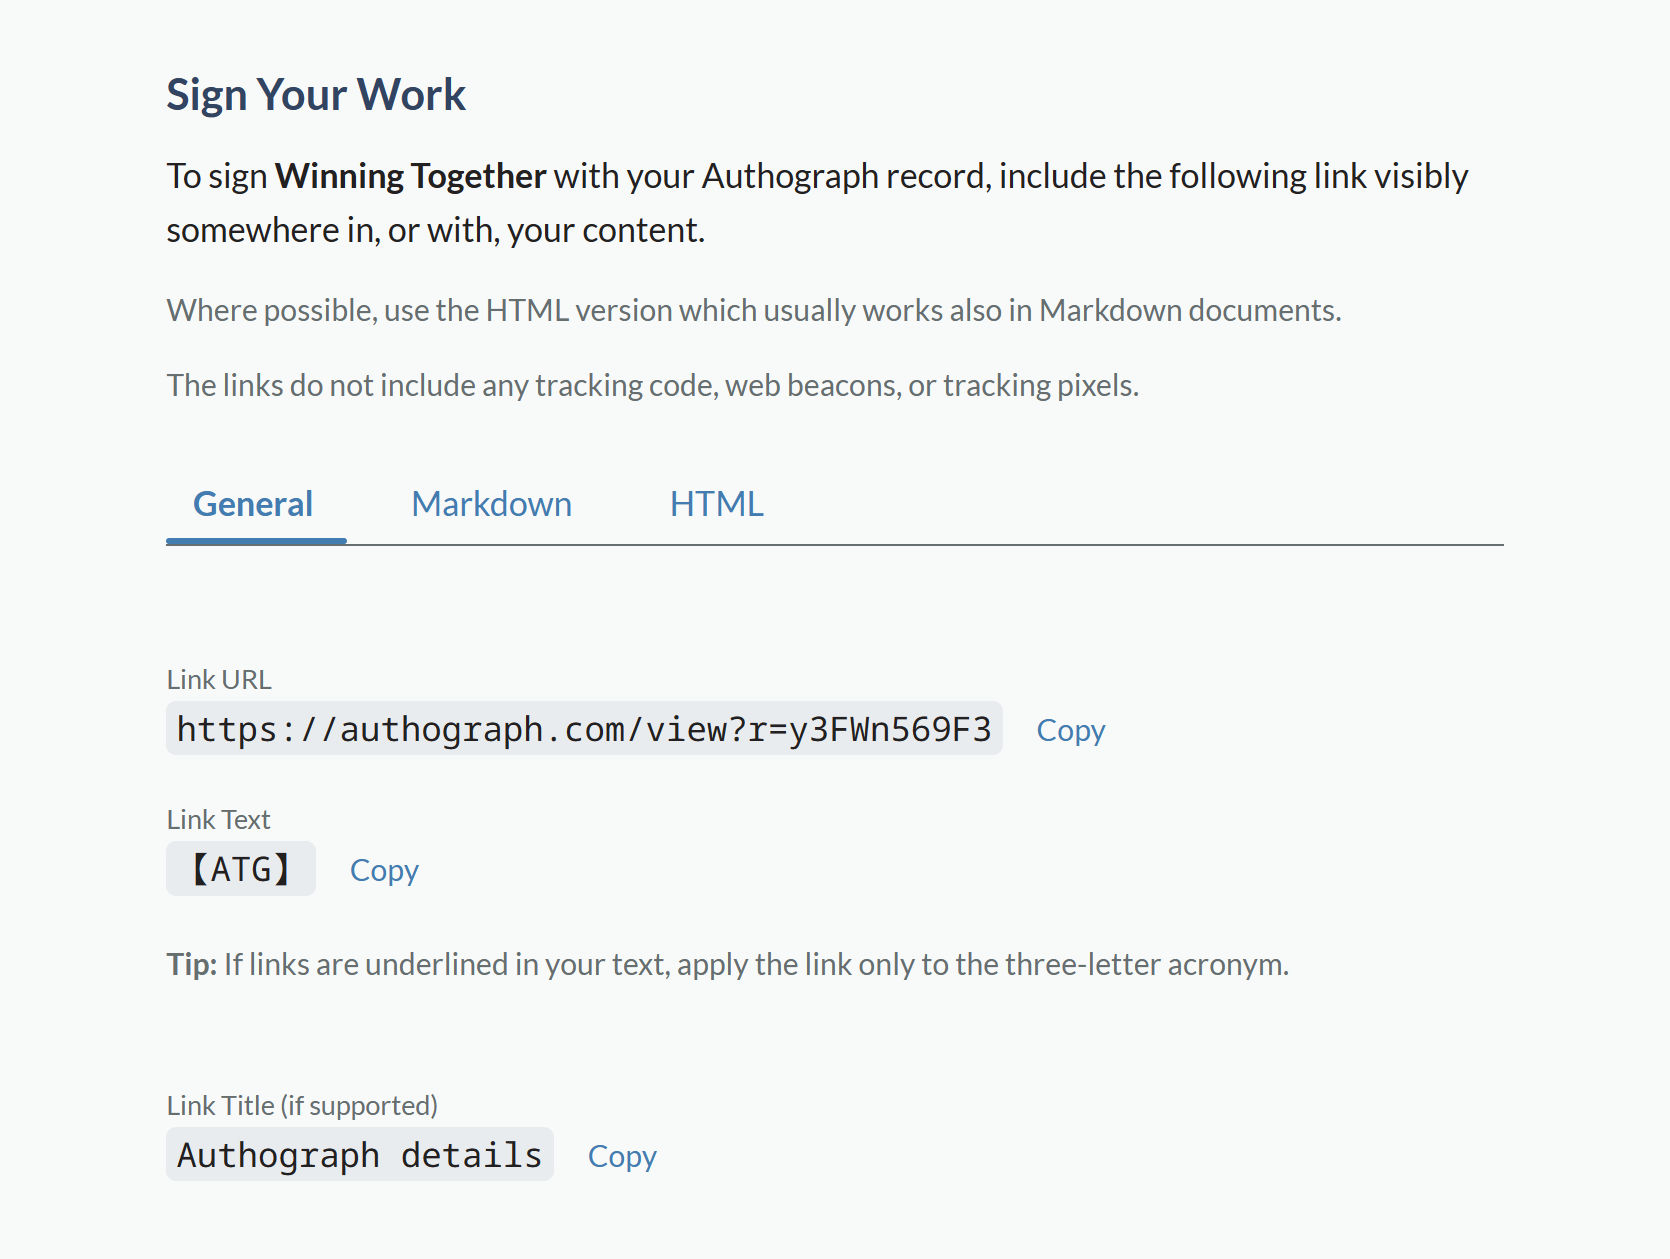 A screenshot of information on how to apply the Authograph link to the content